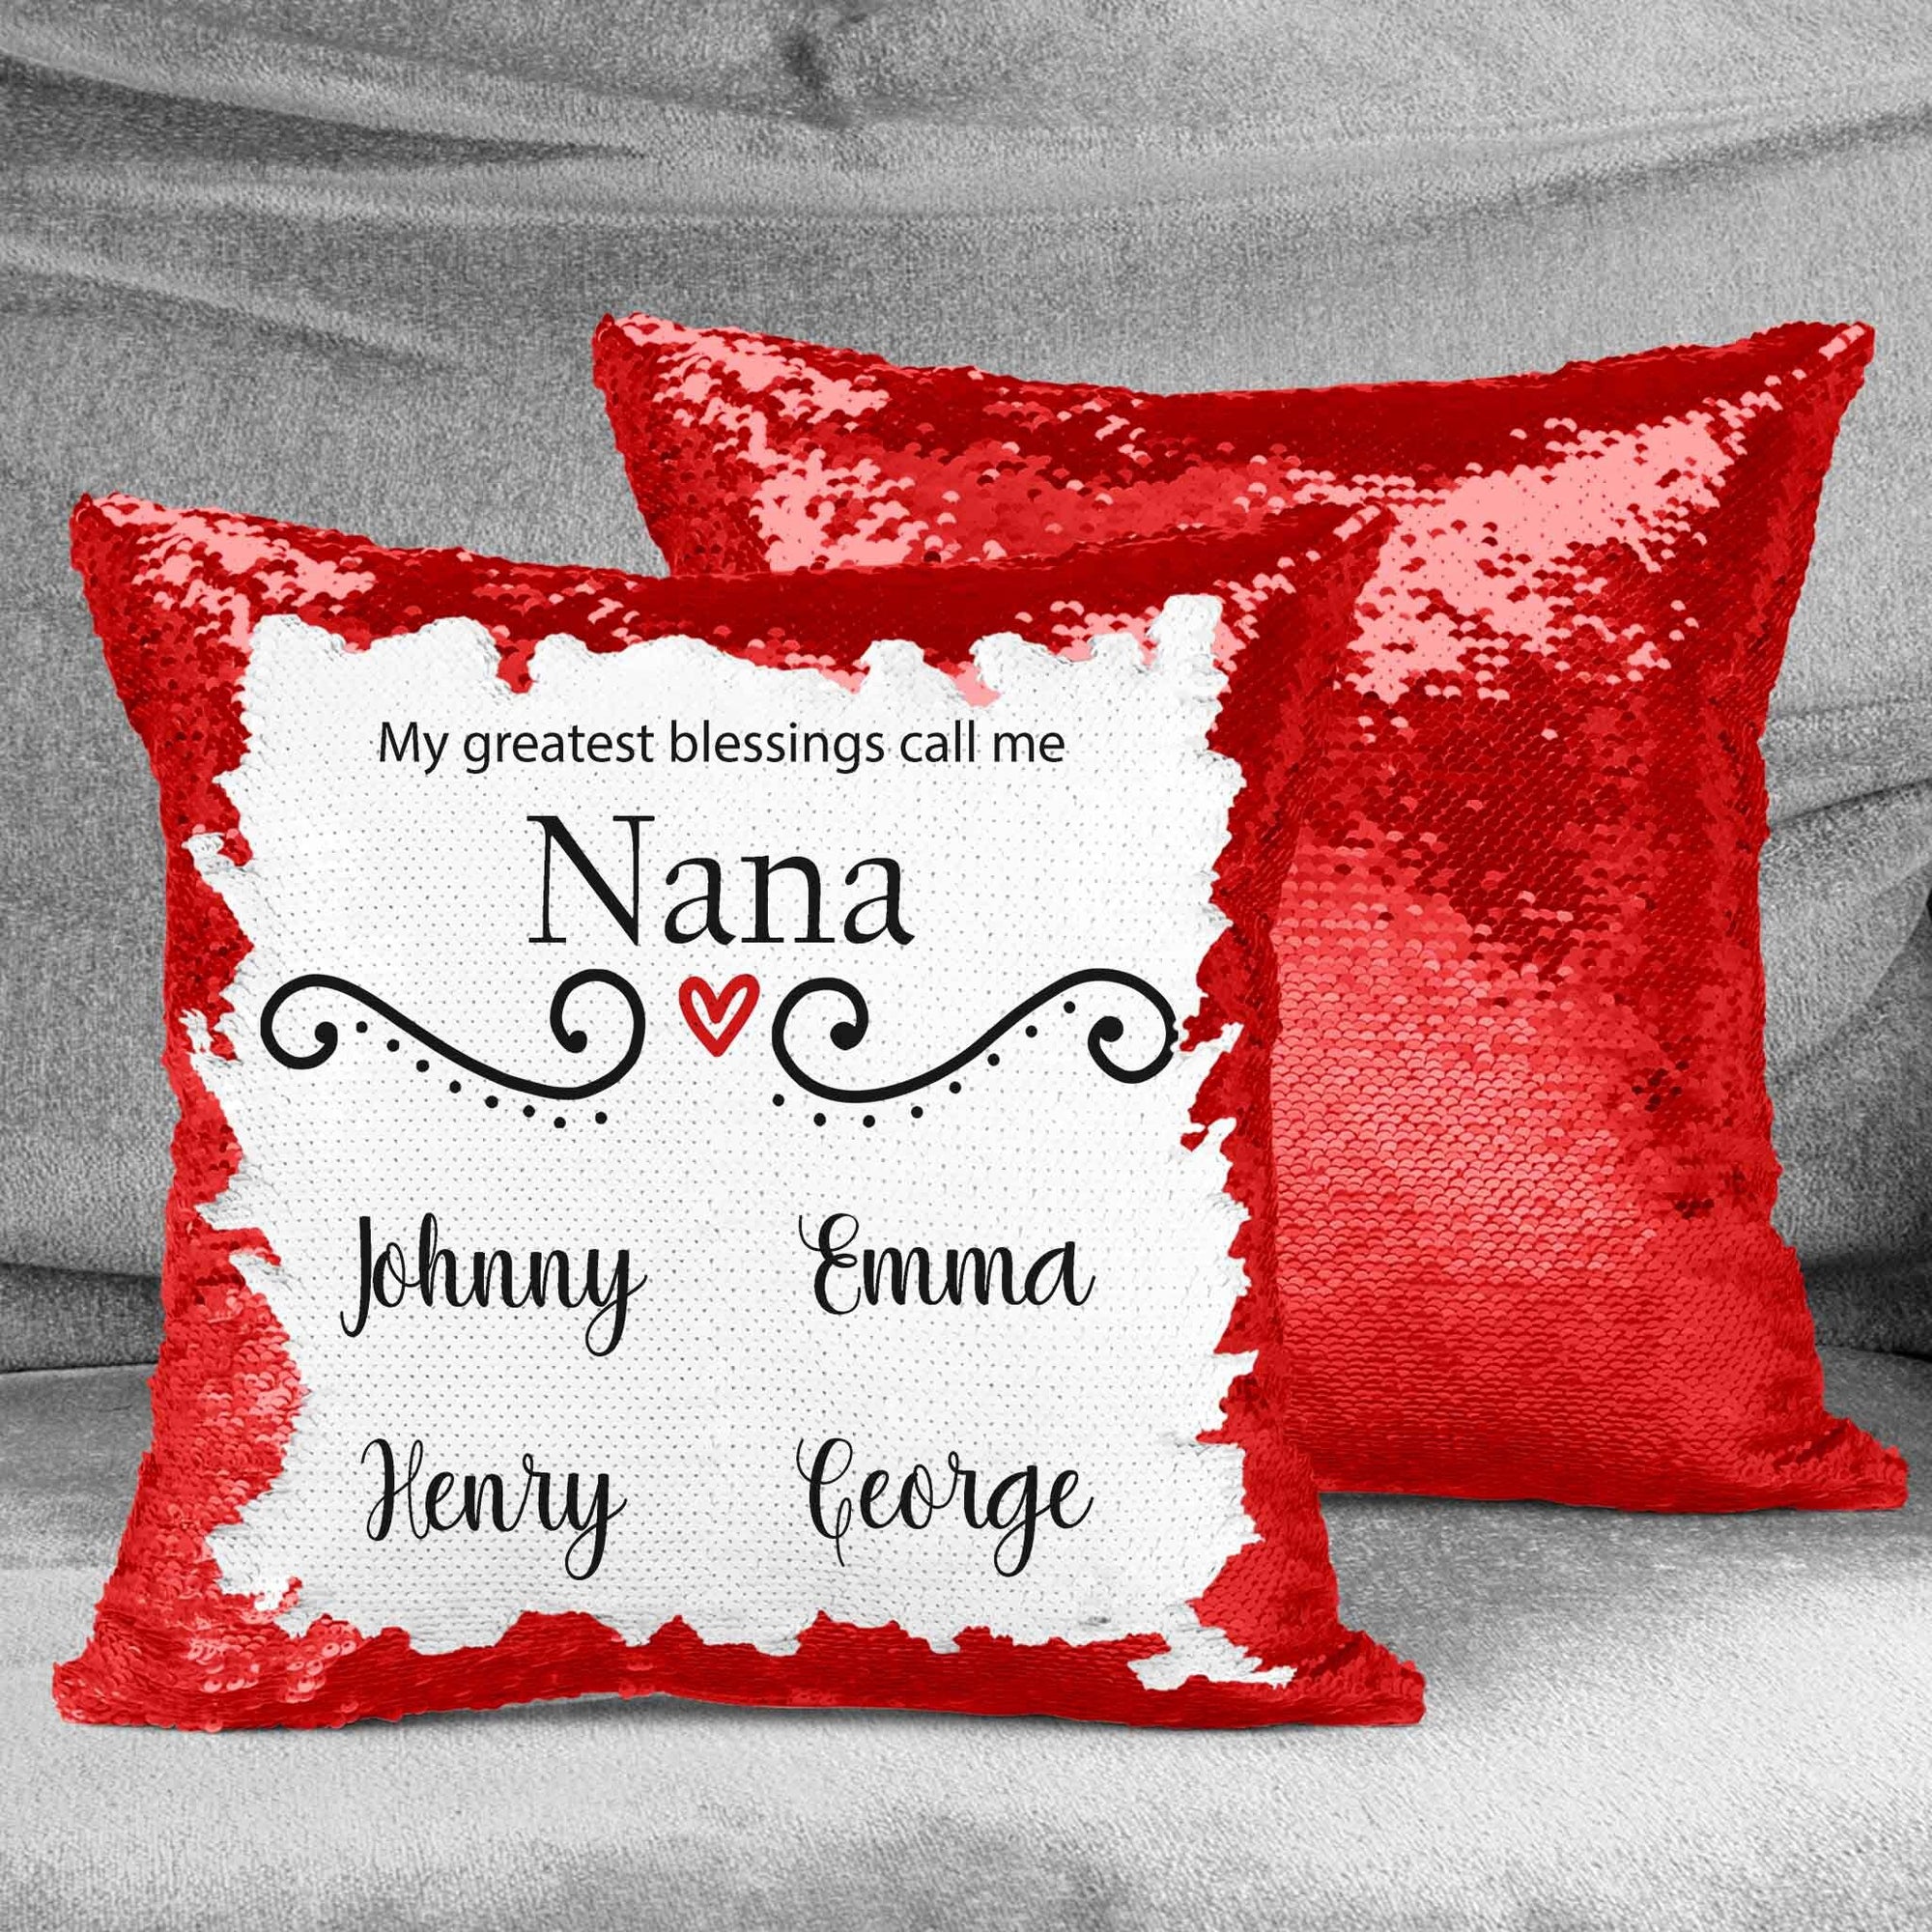 Personalized Sequin Throw Pillow | Custom Sequin Pillow | Nana's Greatest Blessing